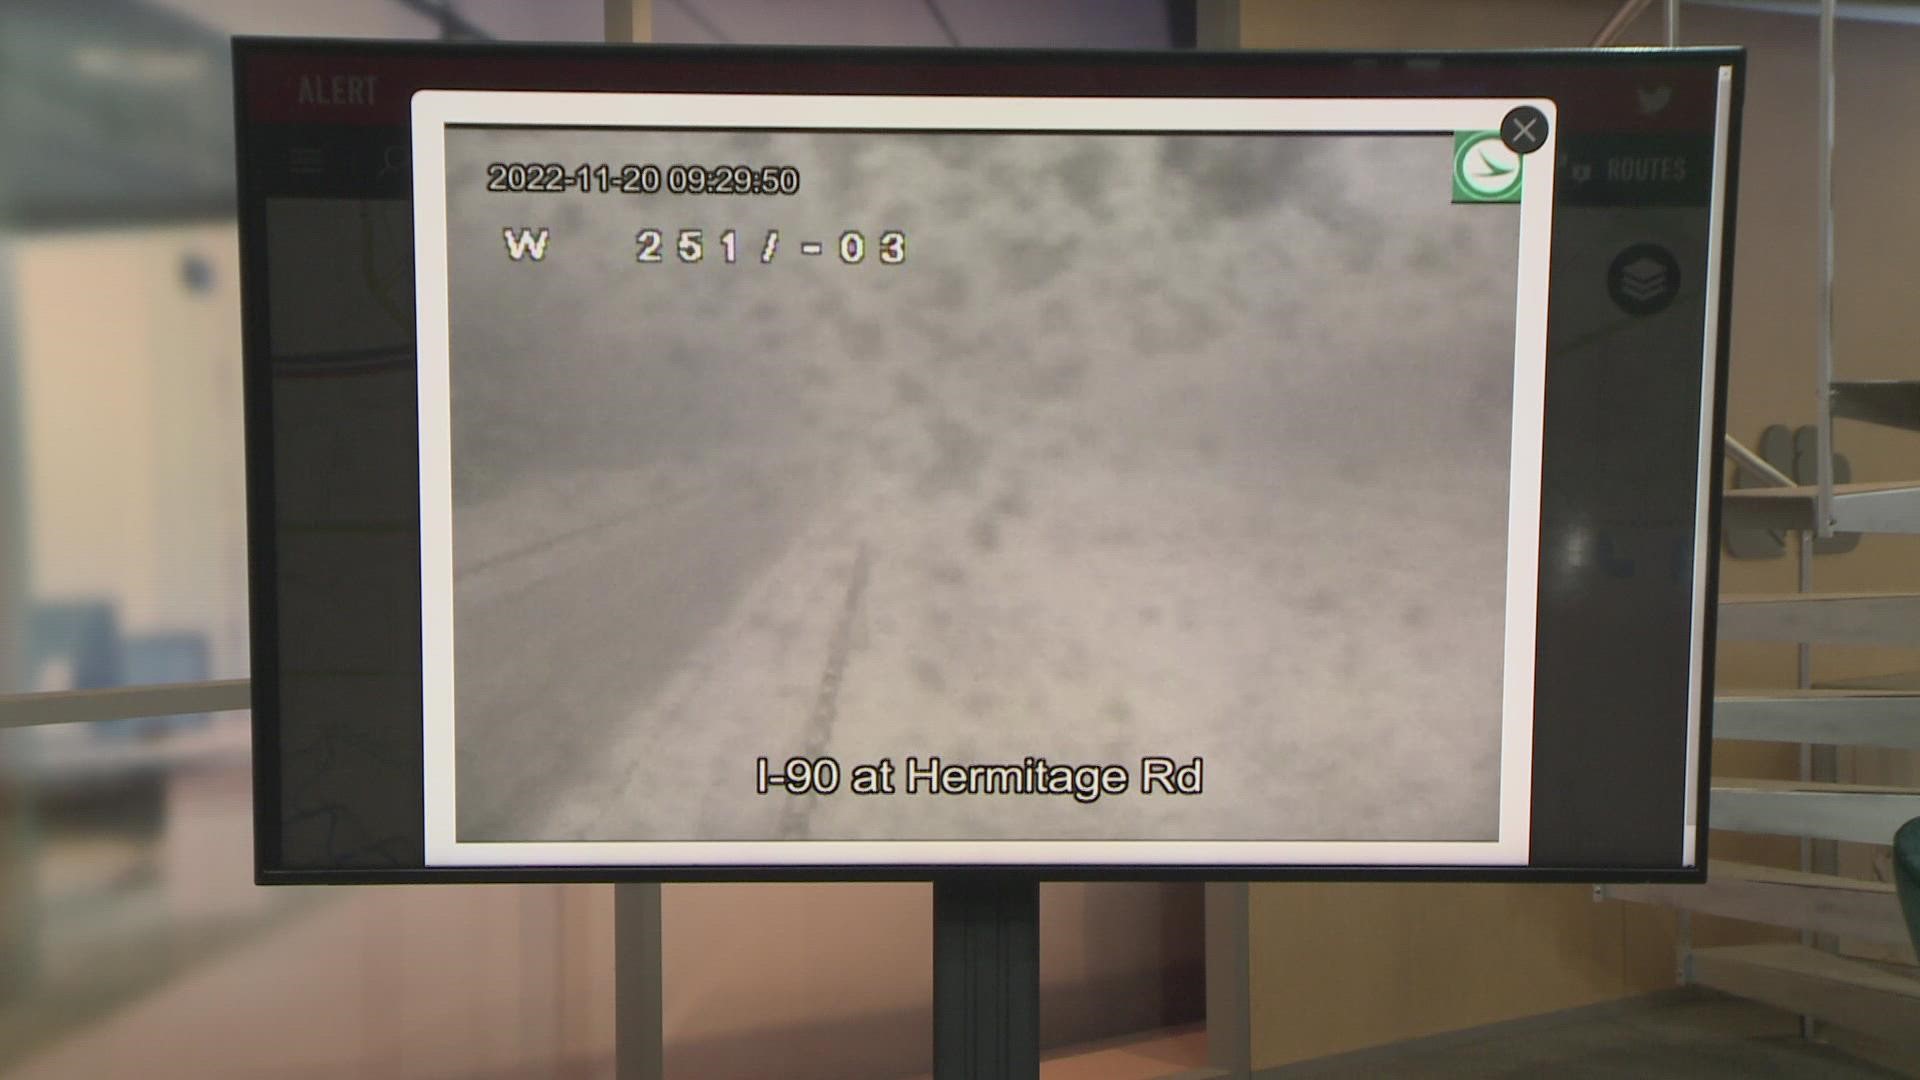 3News' Payton Domschke gives an update on the winter storm that hit Northeast Ohio.